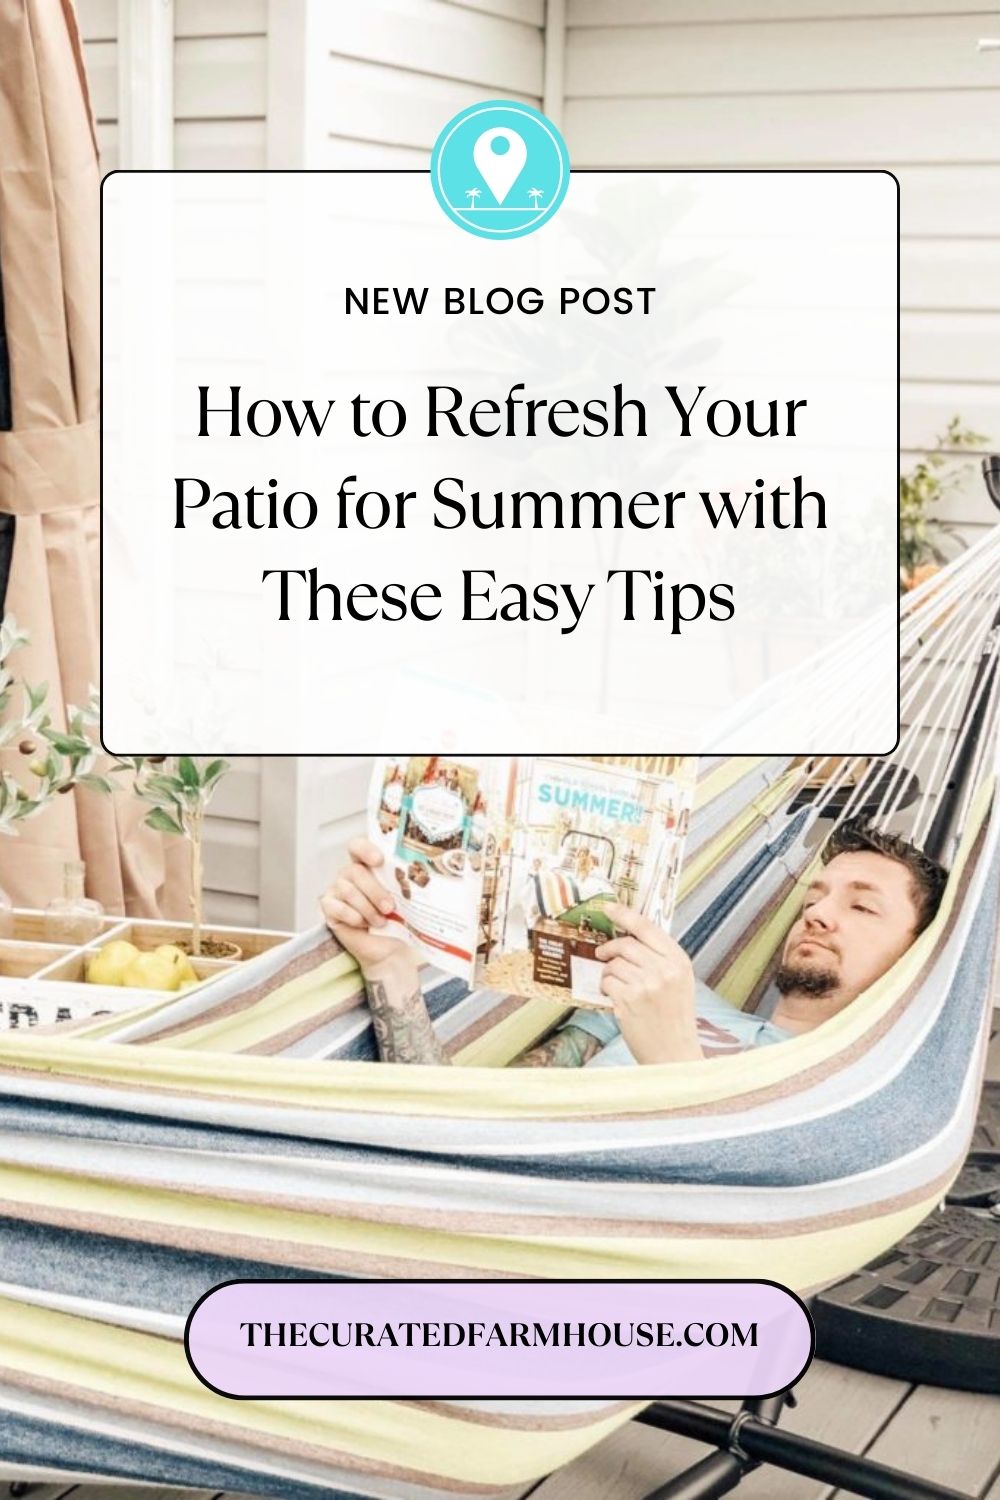 How to Refresh Your Patio for Summer with These Easy Tips